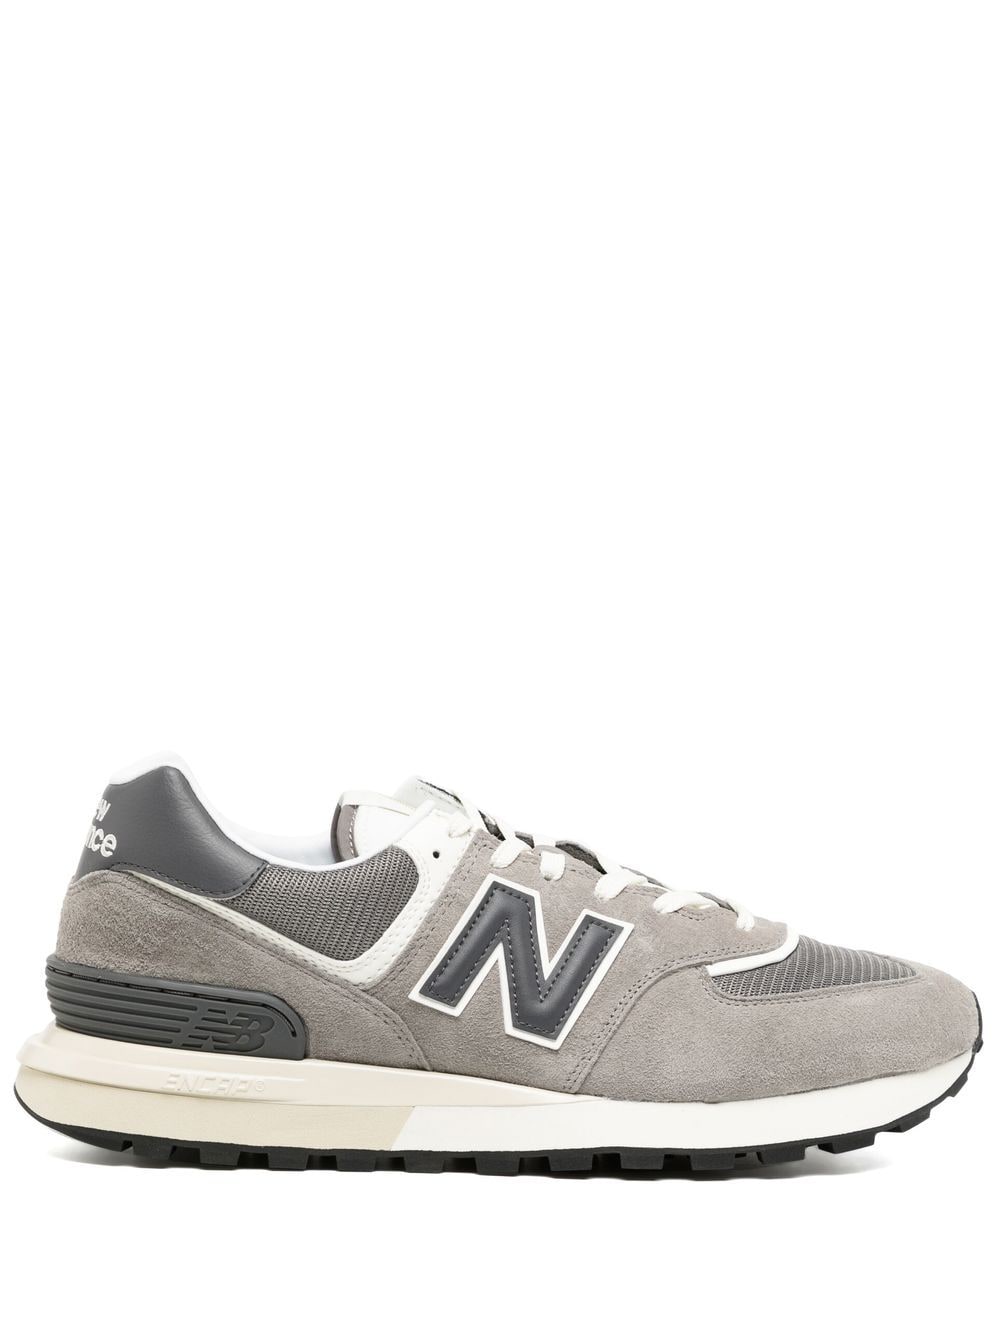 New Balance 547 lace-up sneakers - Grey